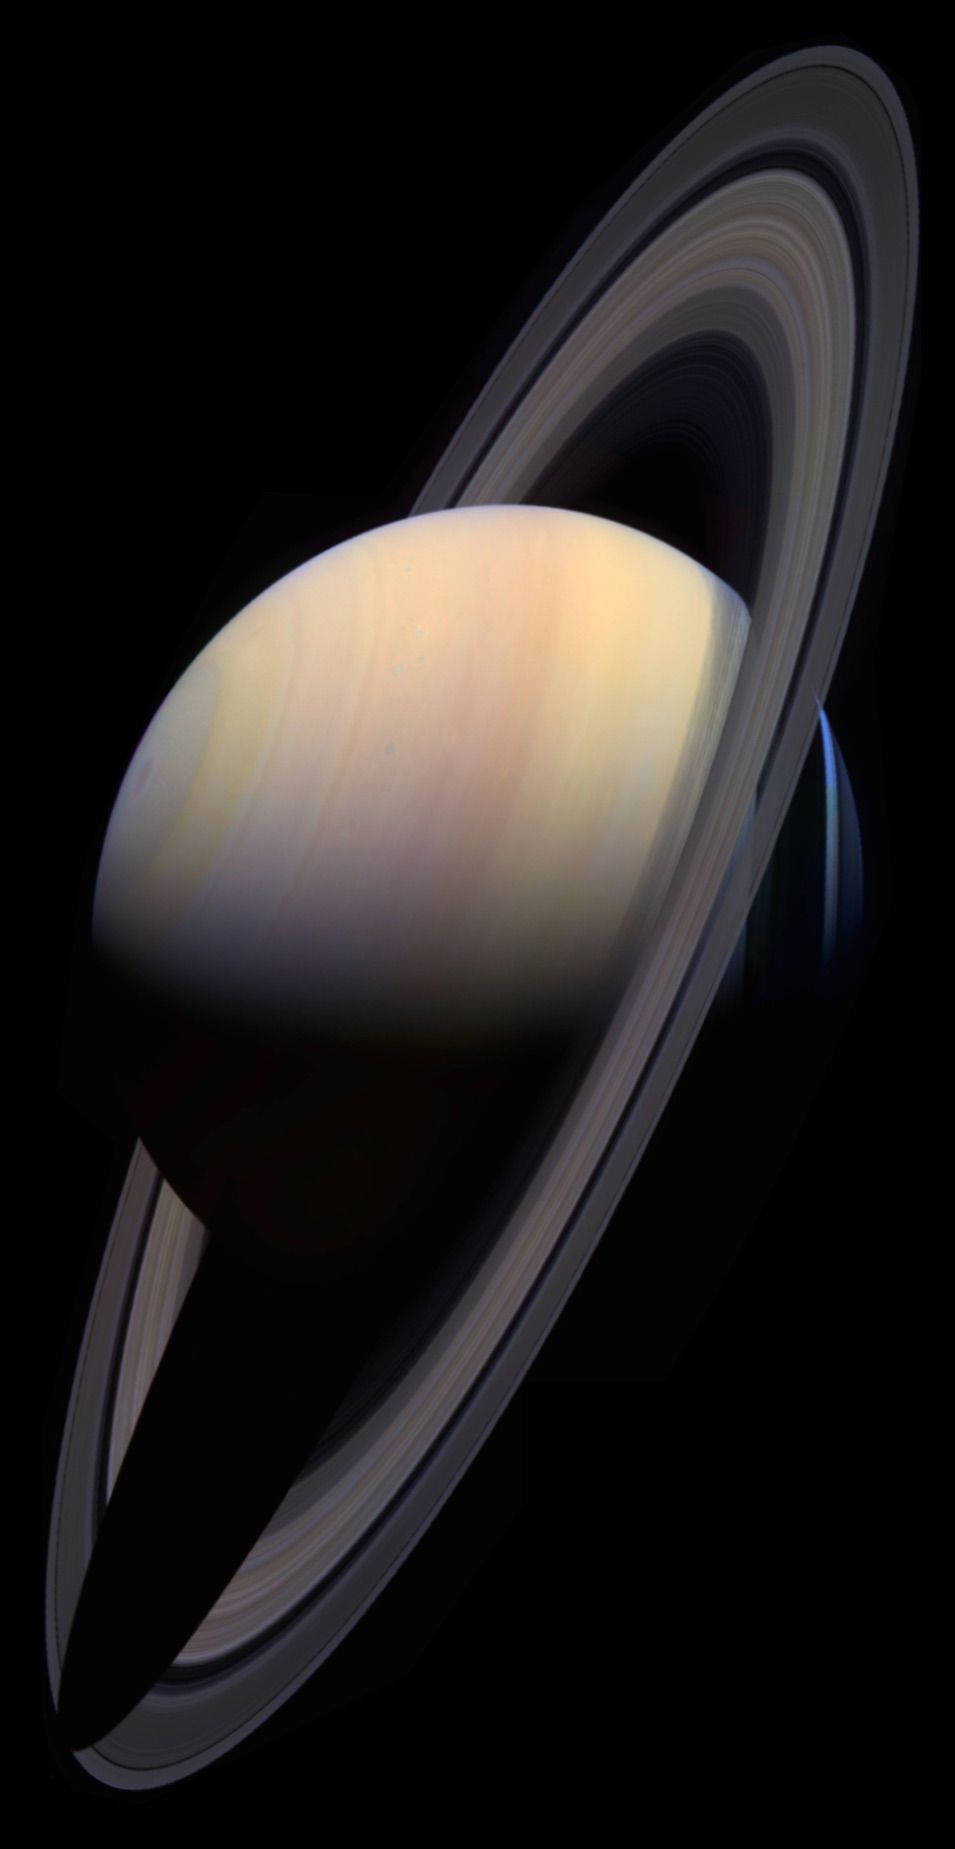 Planet Saturn With Ringlets